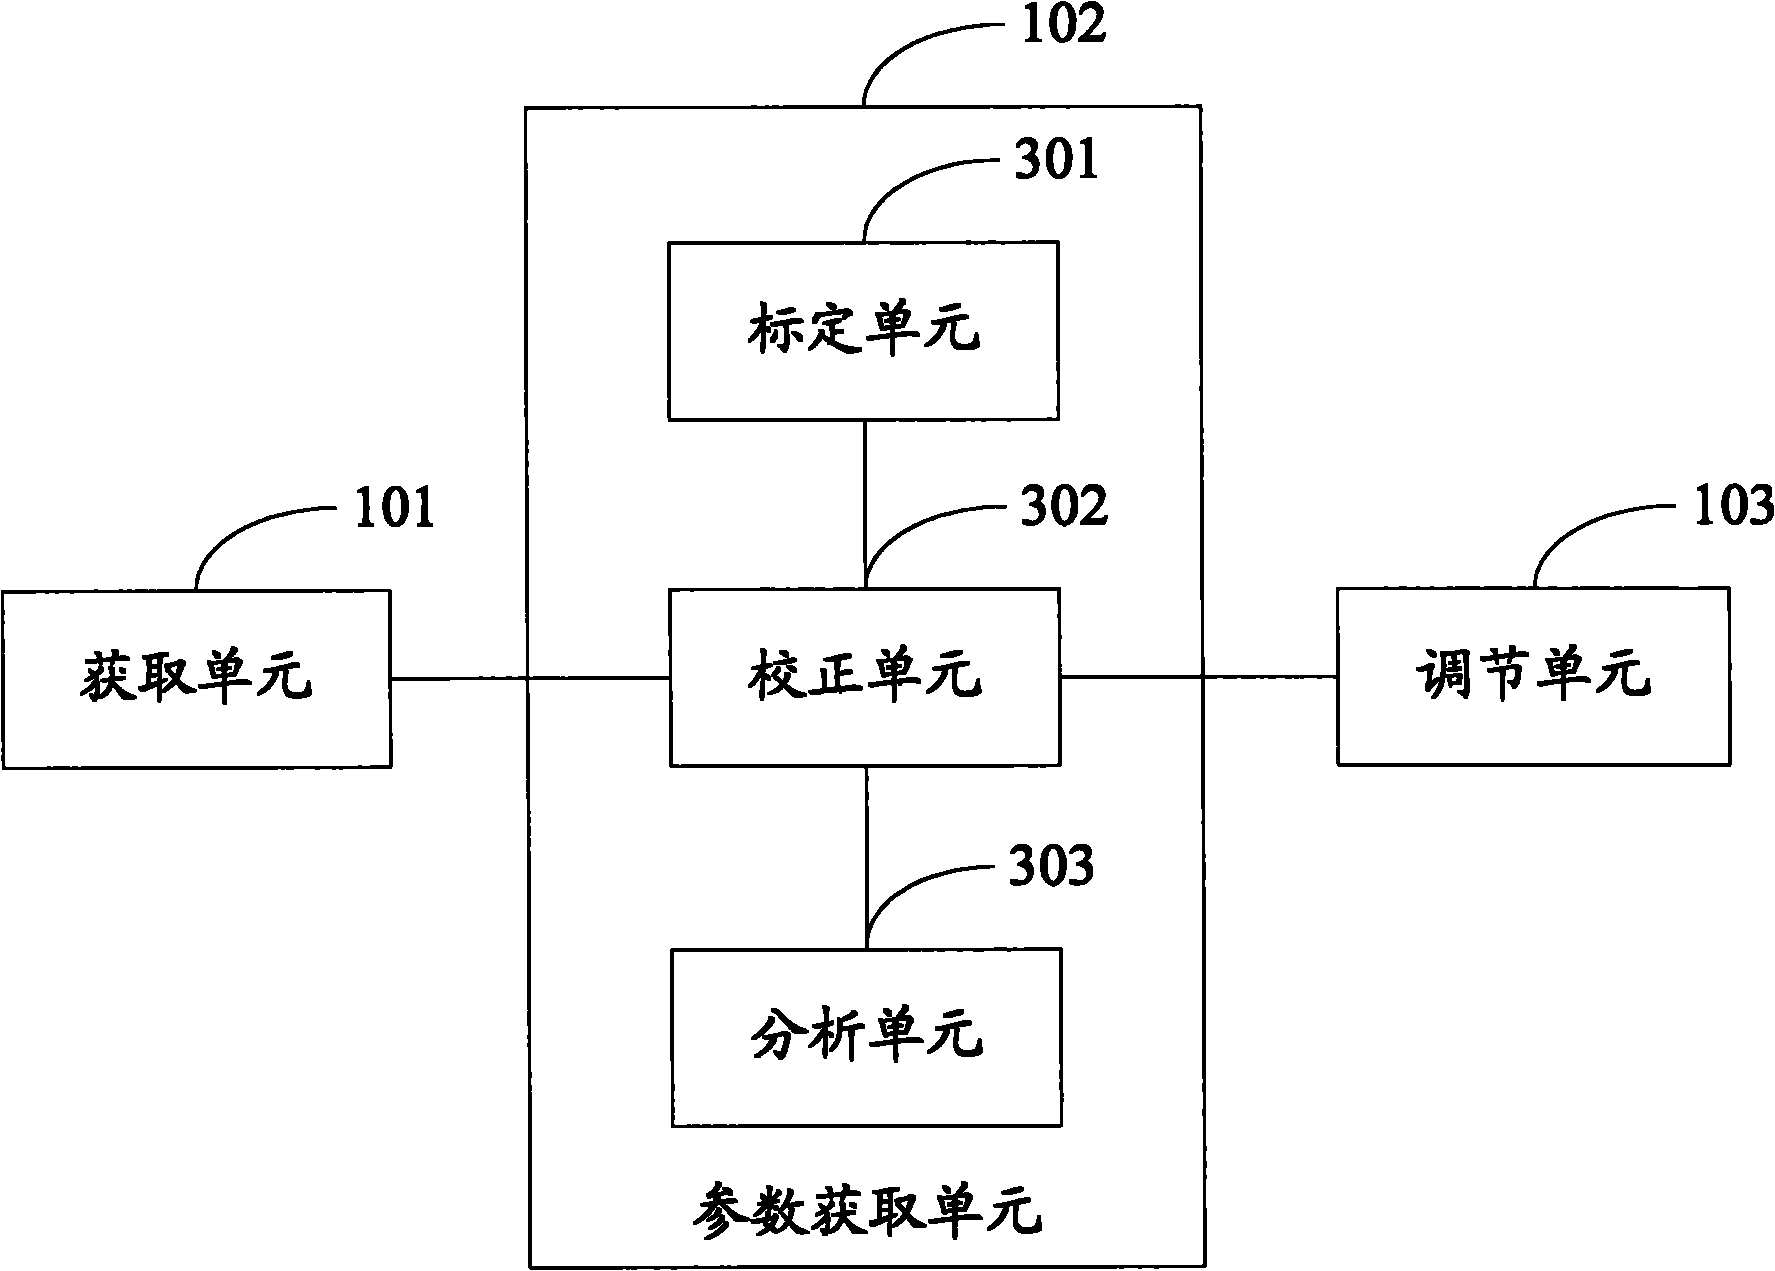 Casting blank specification monitoring system and method